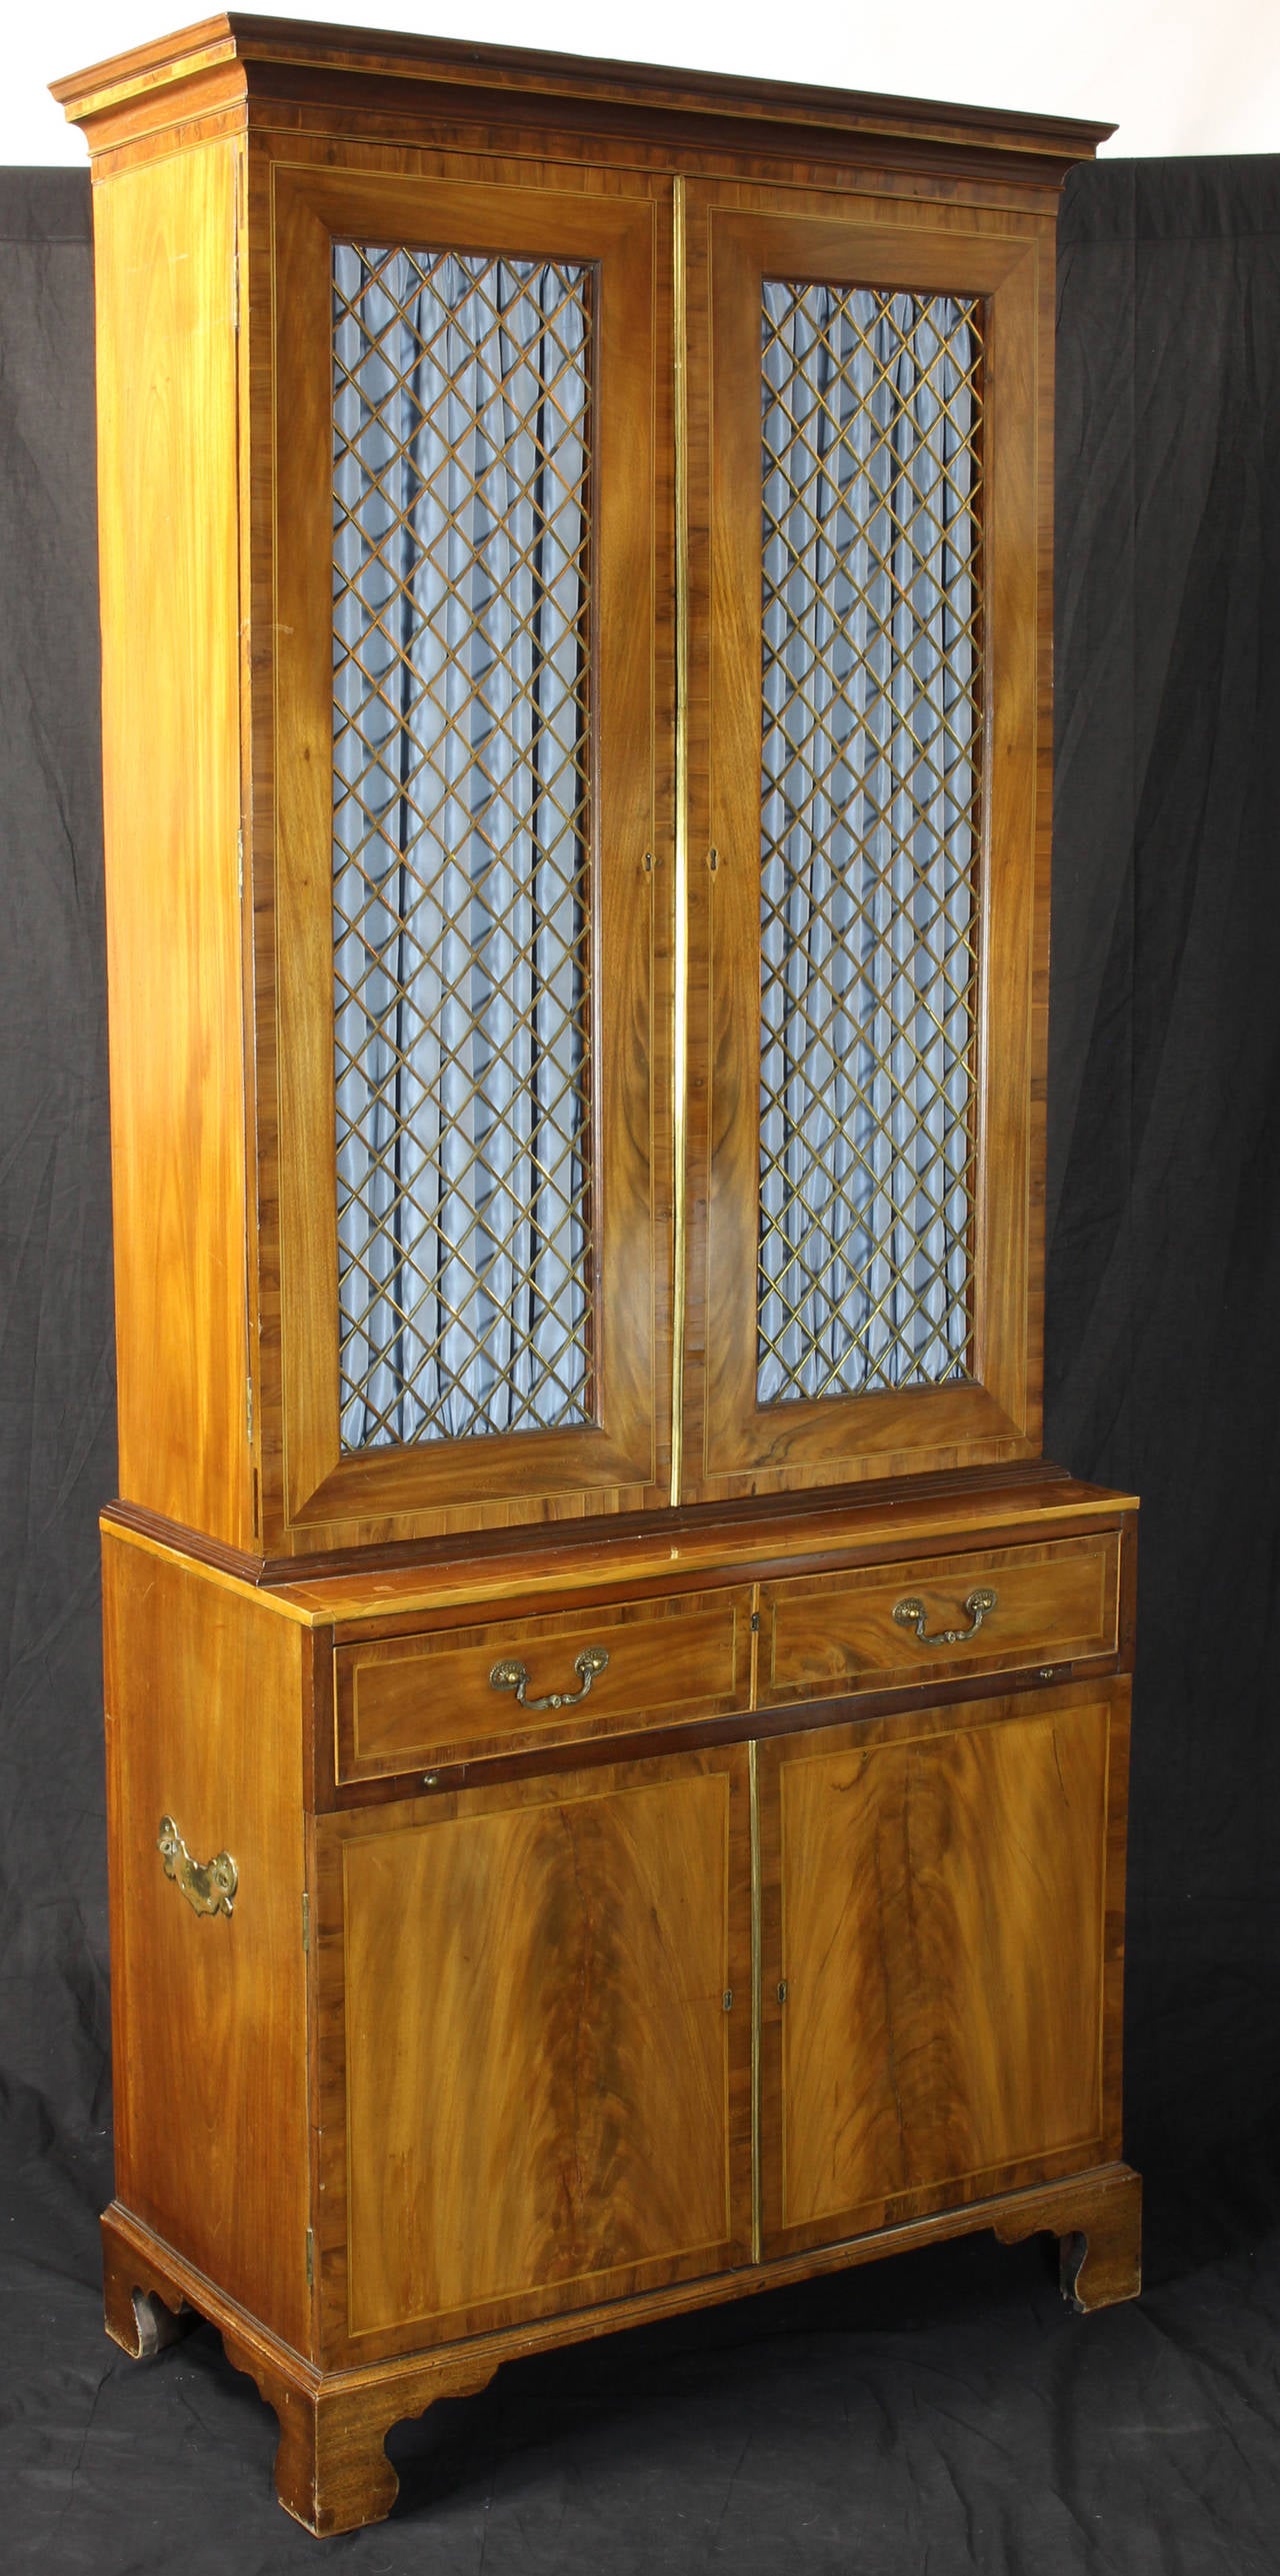 An extremely elegant and beautifully proportioned secretary bookcase made of sun faded mahogany with satinwood accents. The doors are set with diamond shaped grillwork and brass reeding, the lower portion offers a drawer fitted with     a desk above